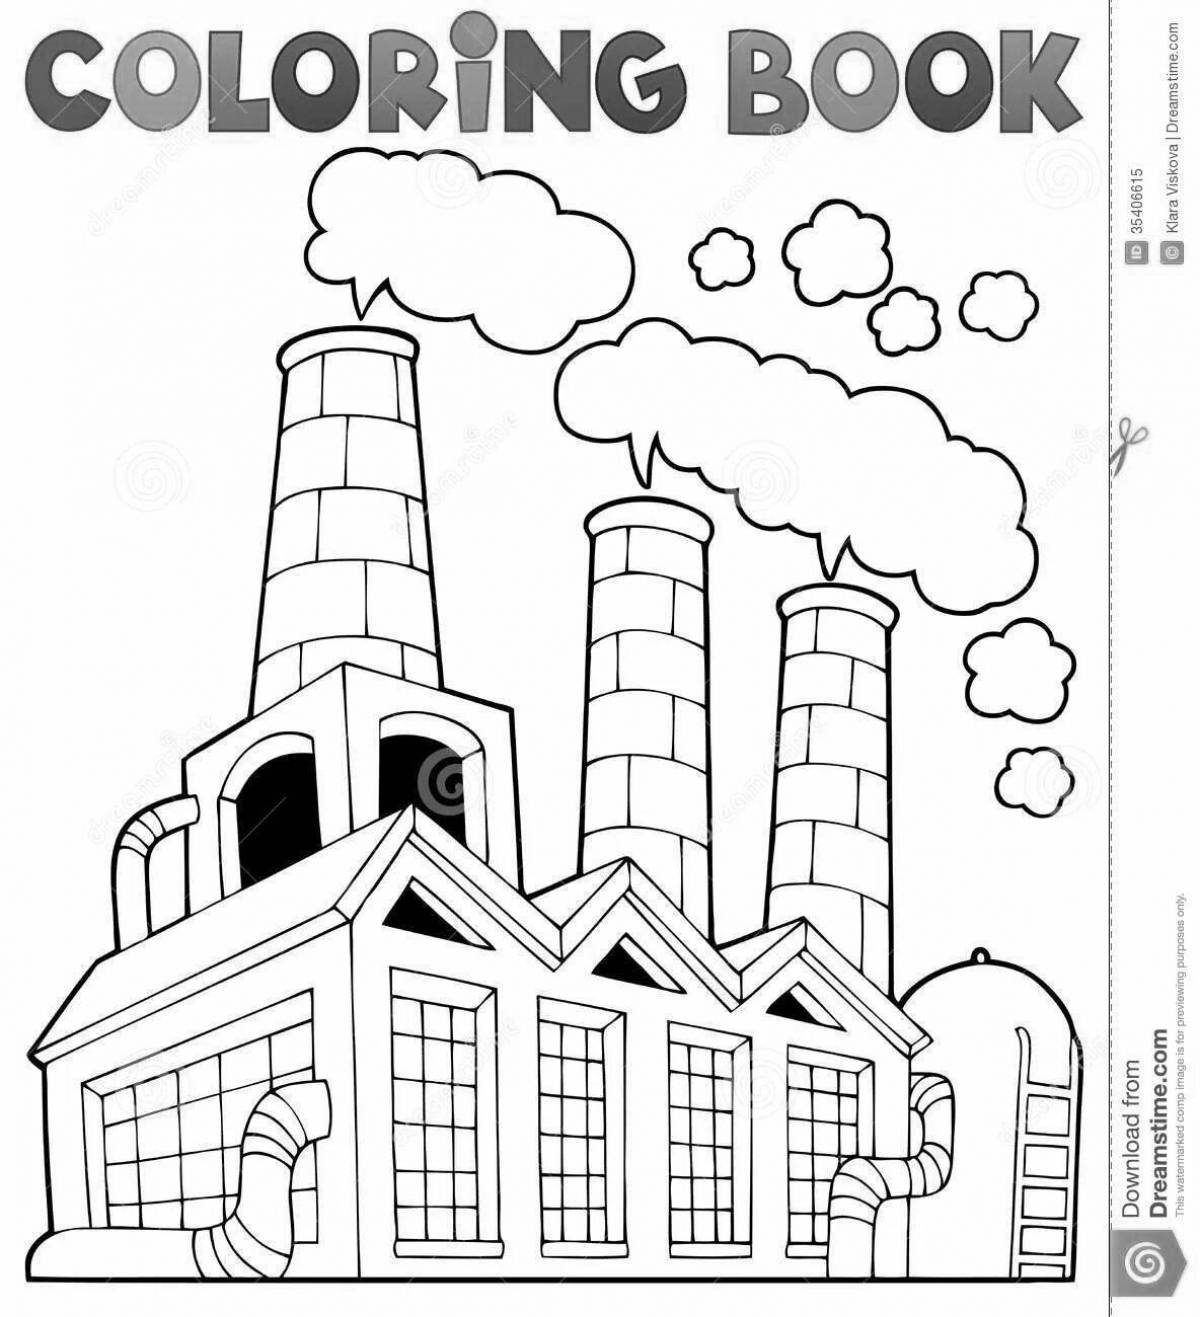 Coloring pages with beautiful plants for children